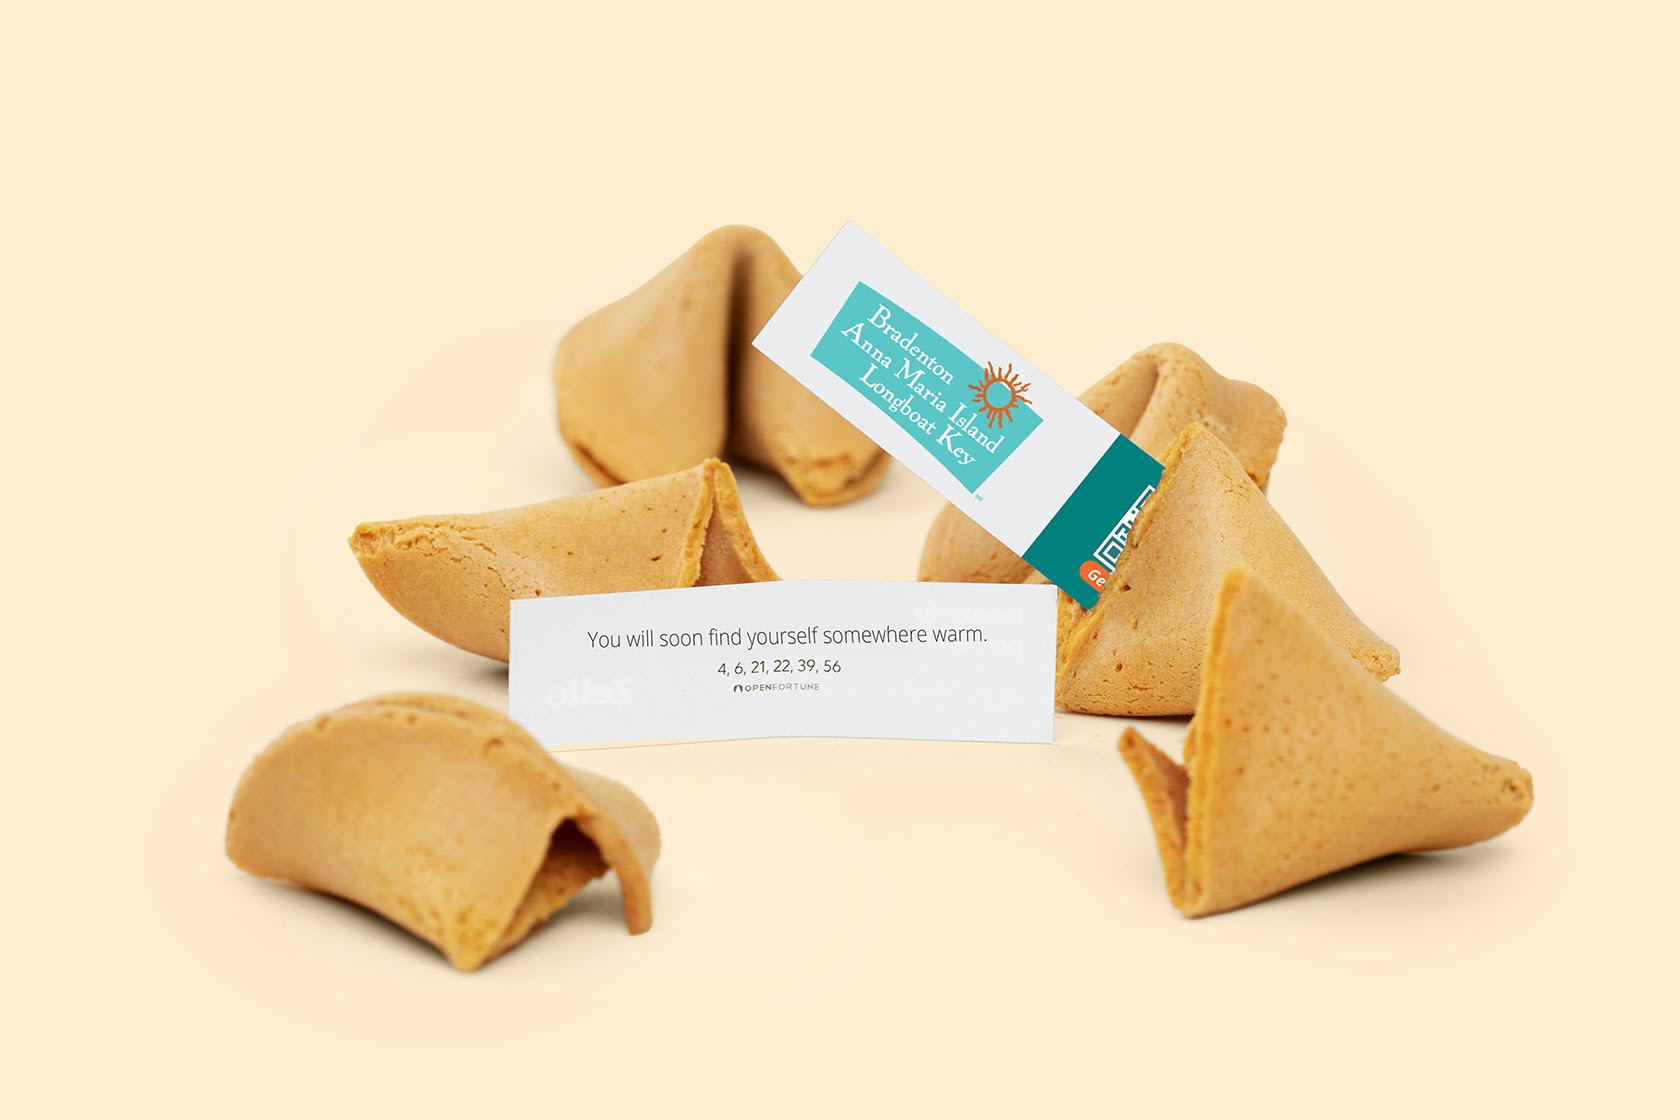 More than 200,000 fortune cookies were distributed in the New Haven, Connecticut area to induce people to visit Manatee County.